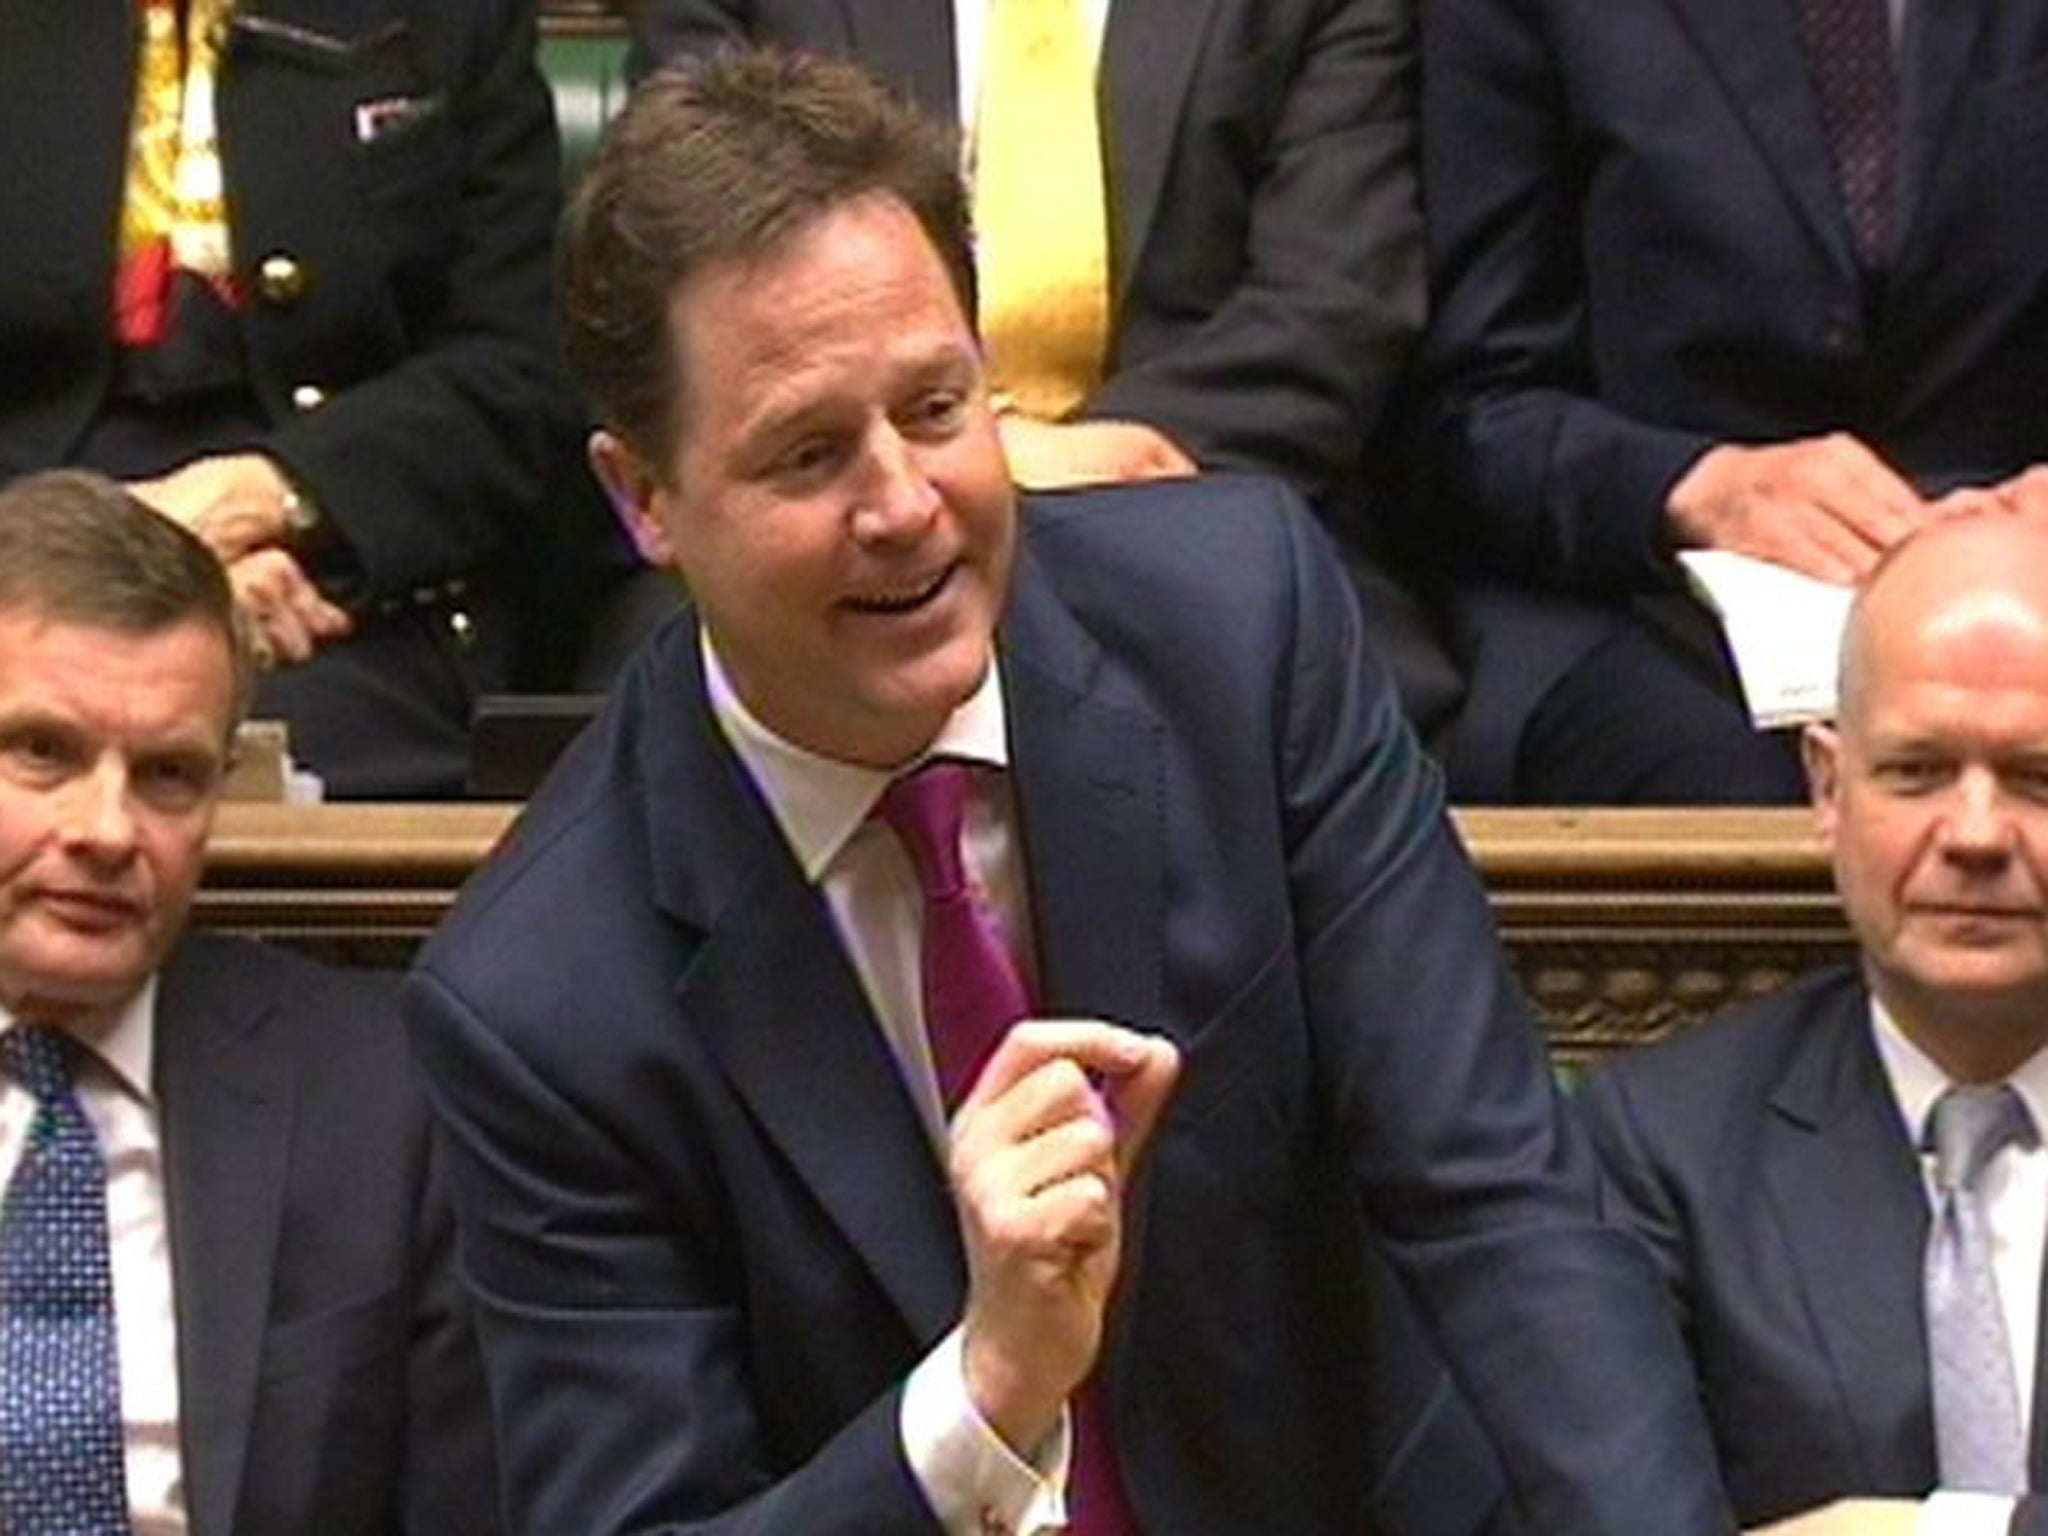 Deputy Prime Minister Nick Clegg standing in for David Cameron during Prime Minister's Questions